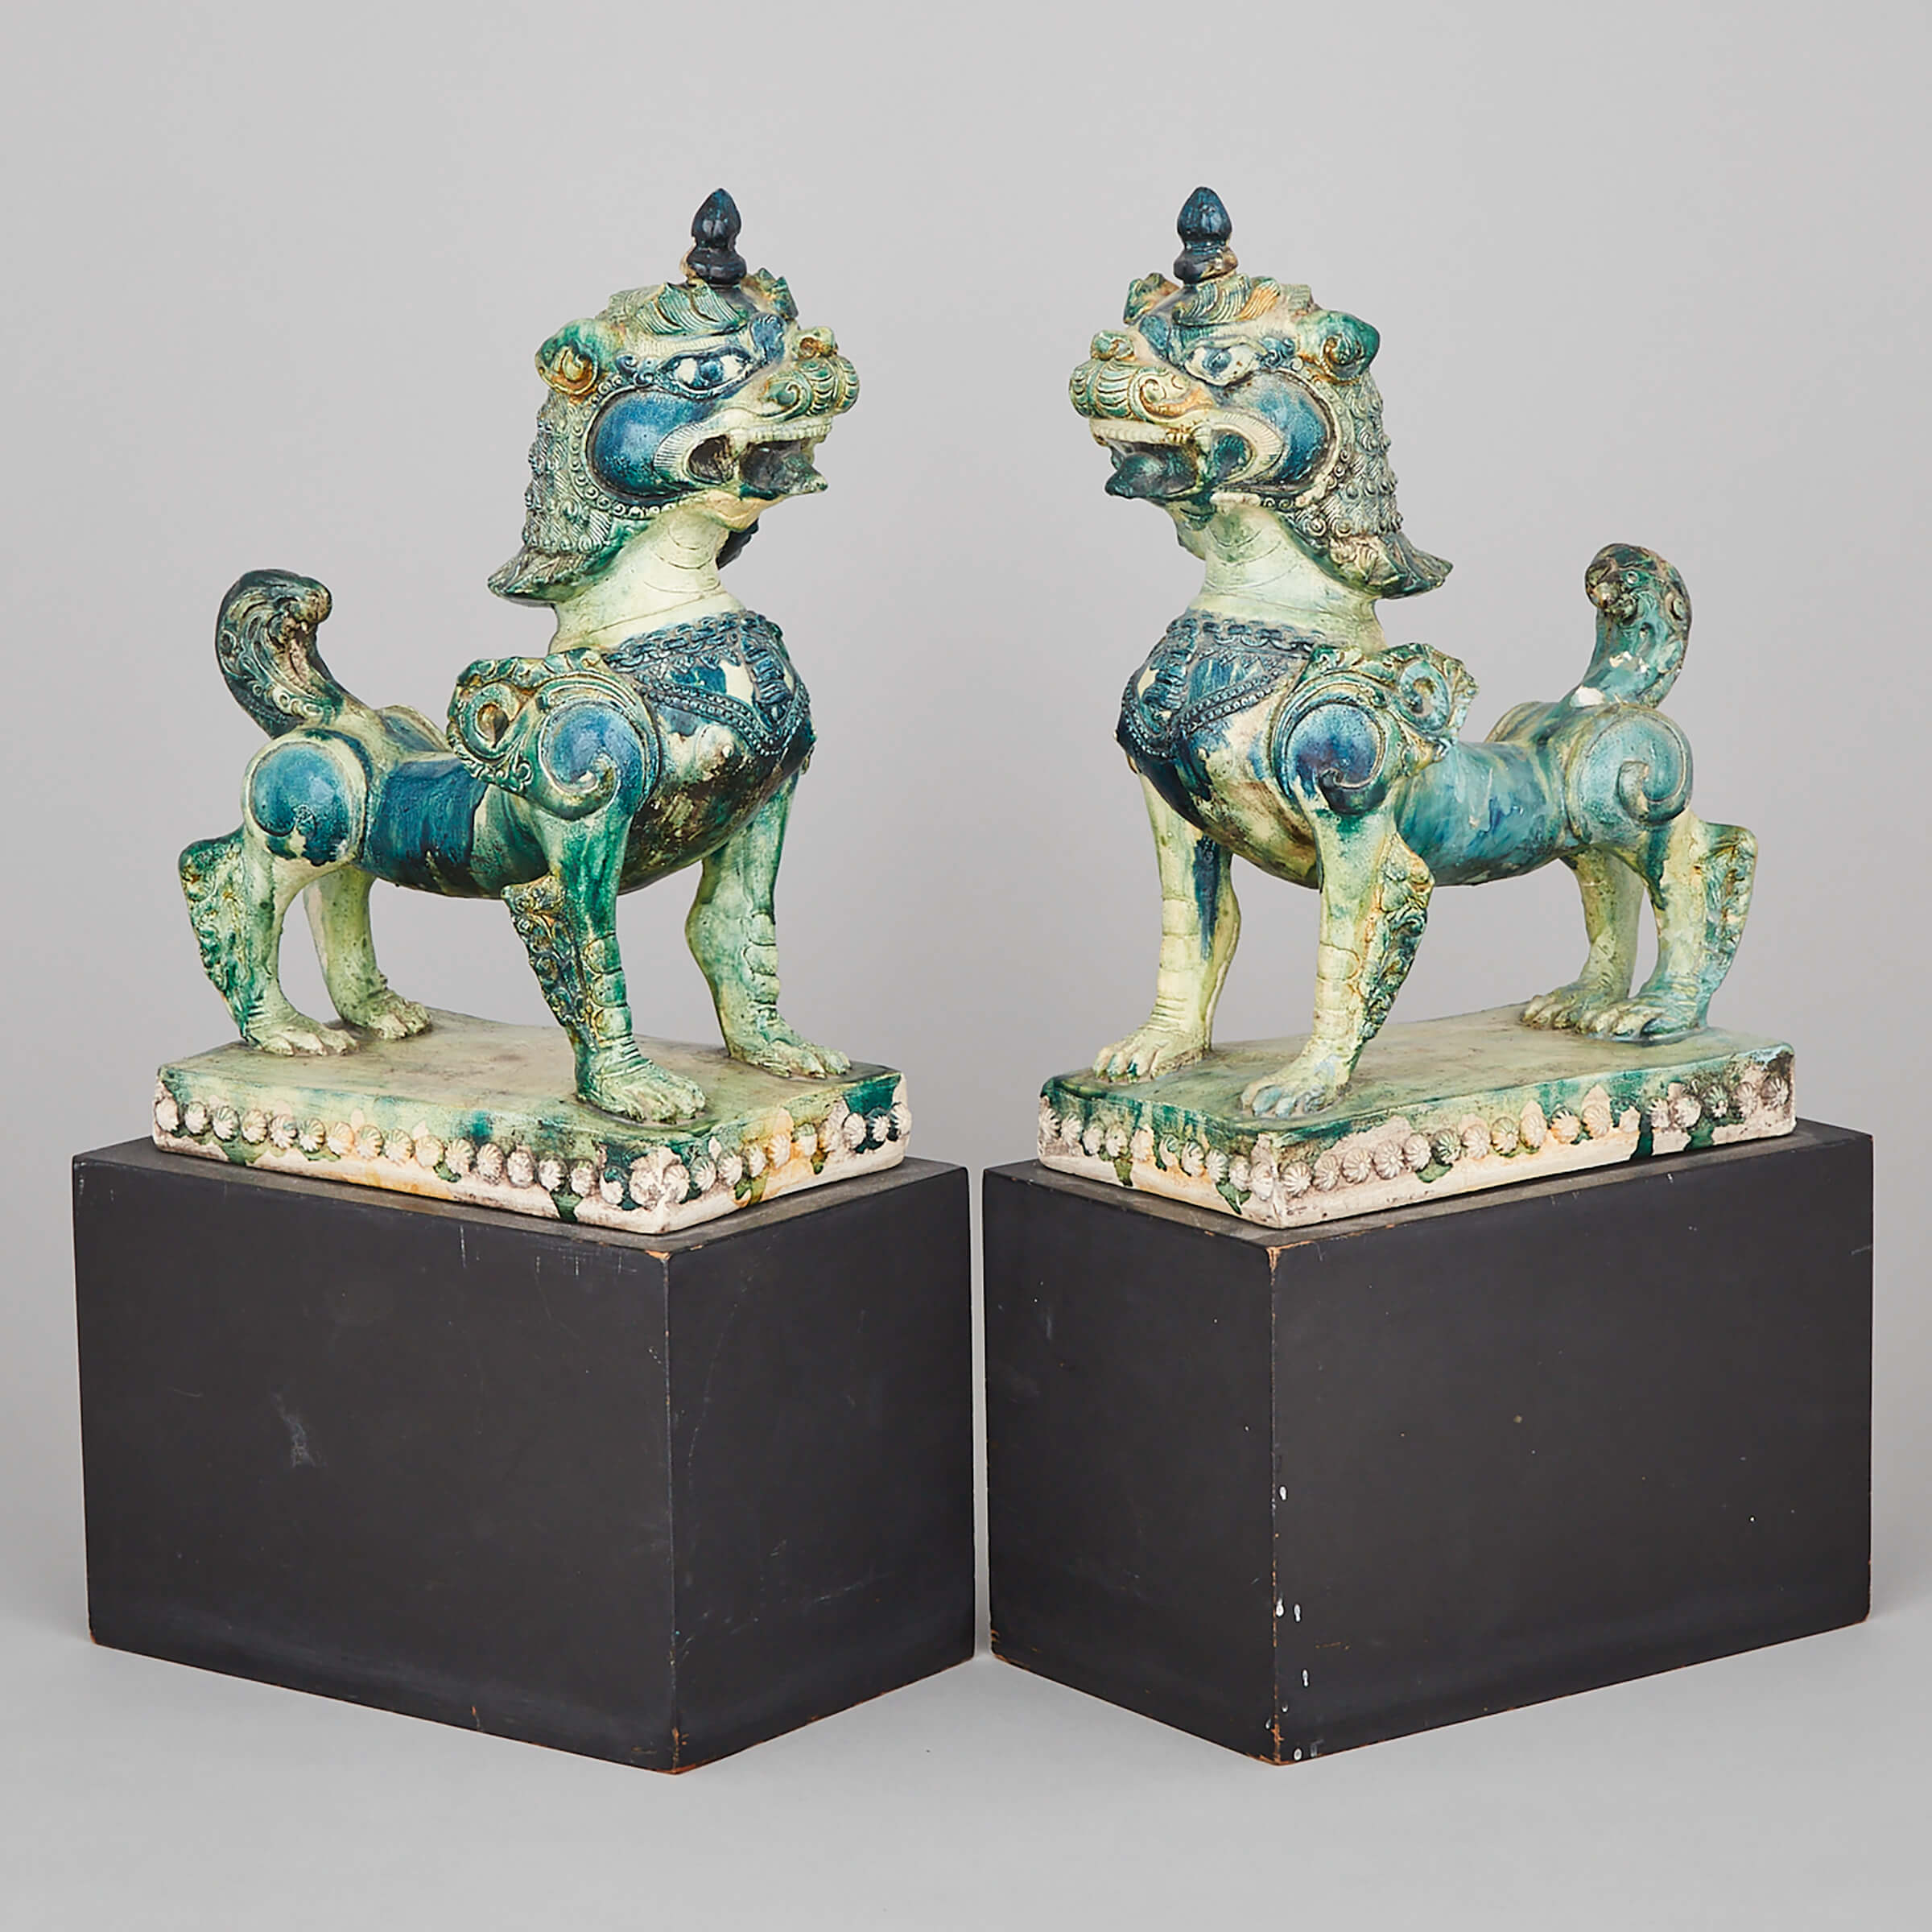 Pair of Southeast Asian Faience Pottery Guardian Lions, 20th century